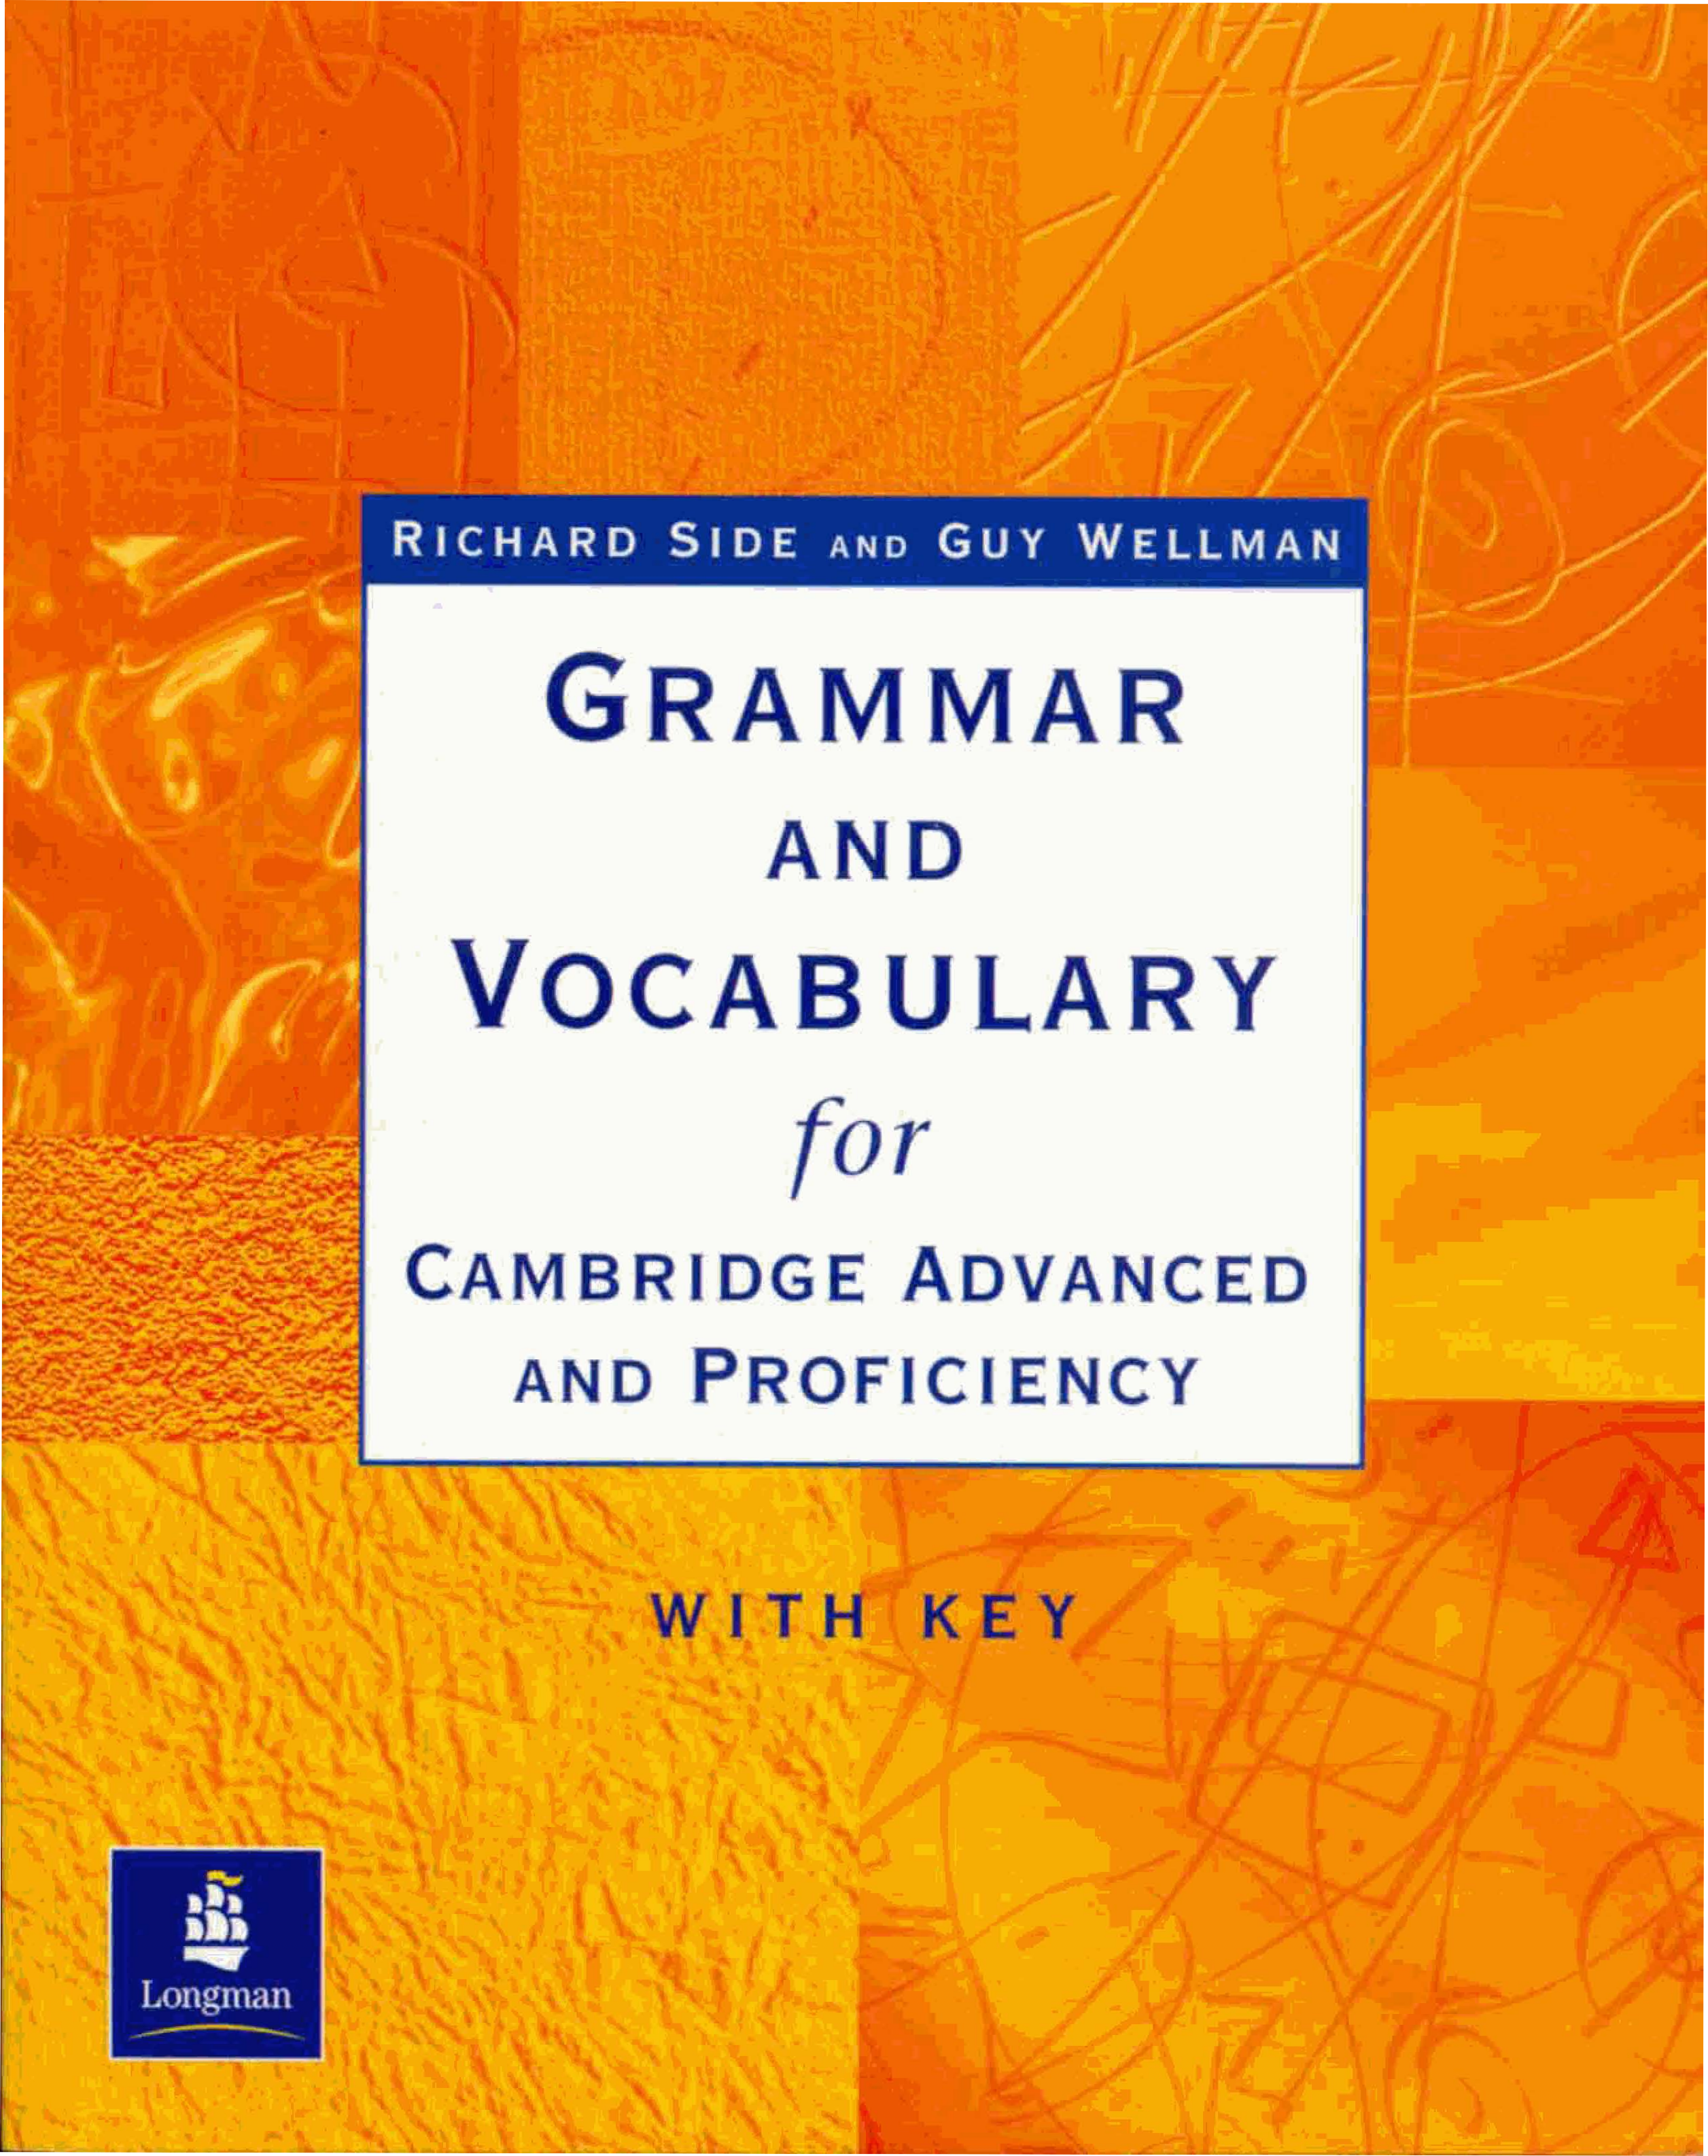 R Side G Wellman (Longman) Grammar and Vocabulary for Cambridge Advanced and Proficiency